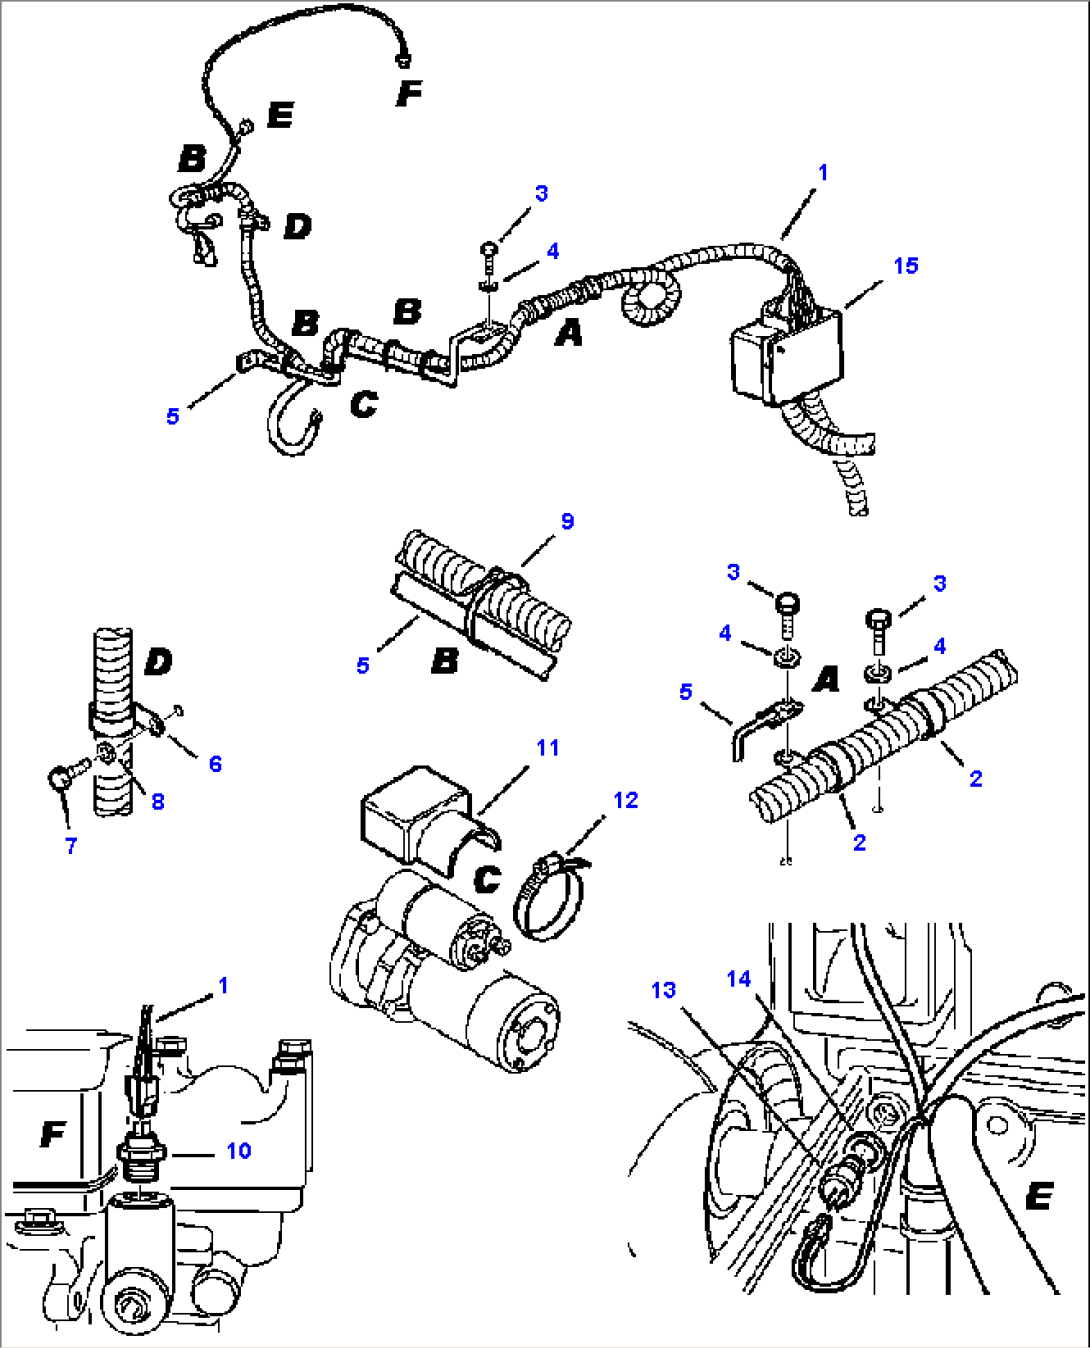 FIG. E1500-01A0 ELECTRICAL SYSTEM - ENGINE WIRING